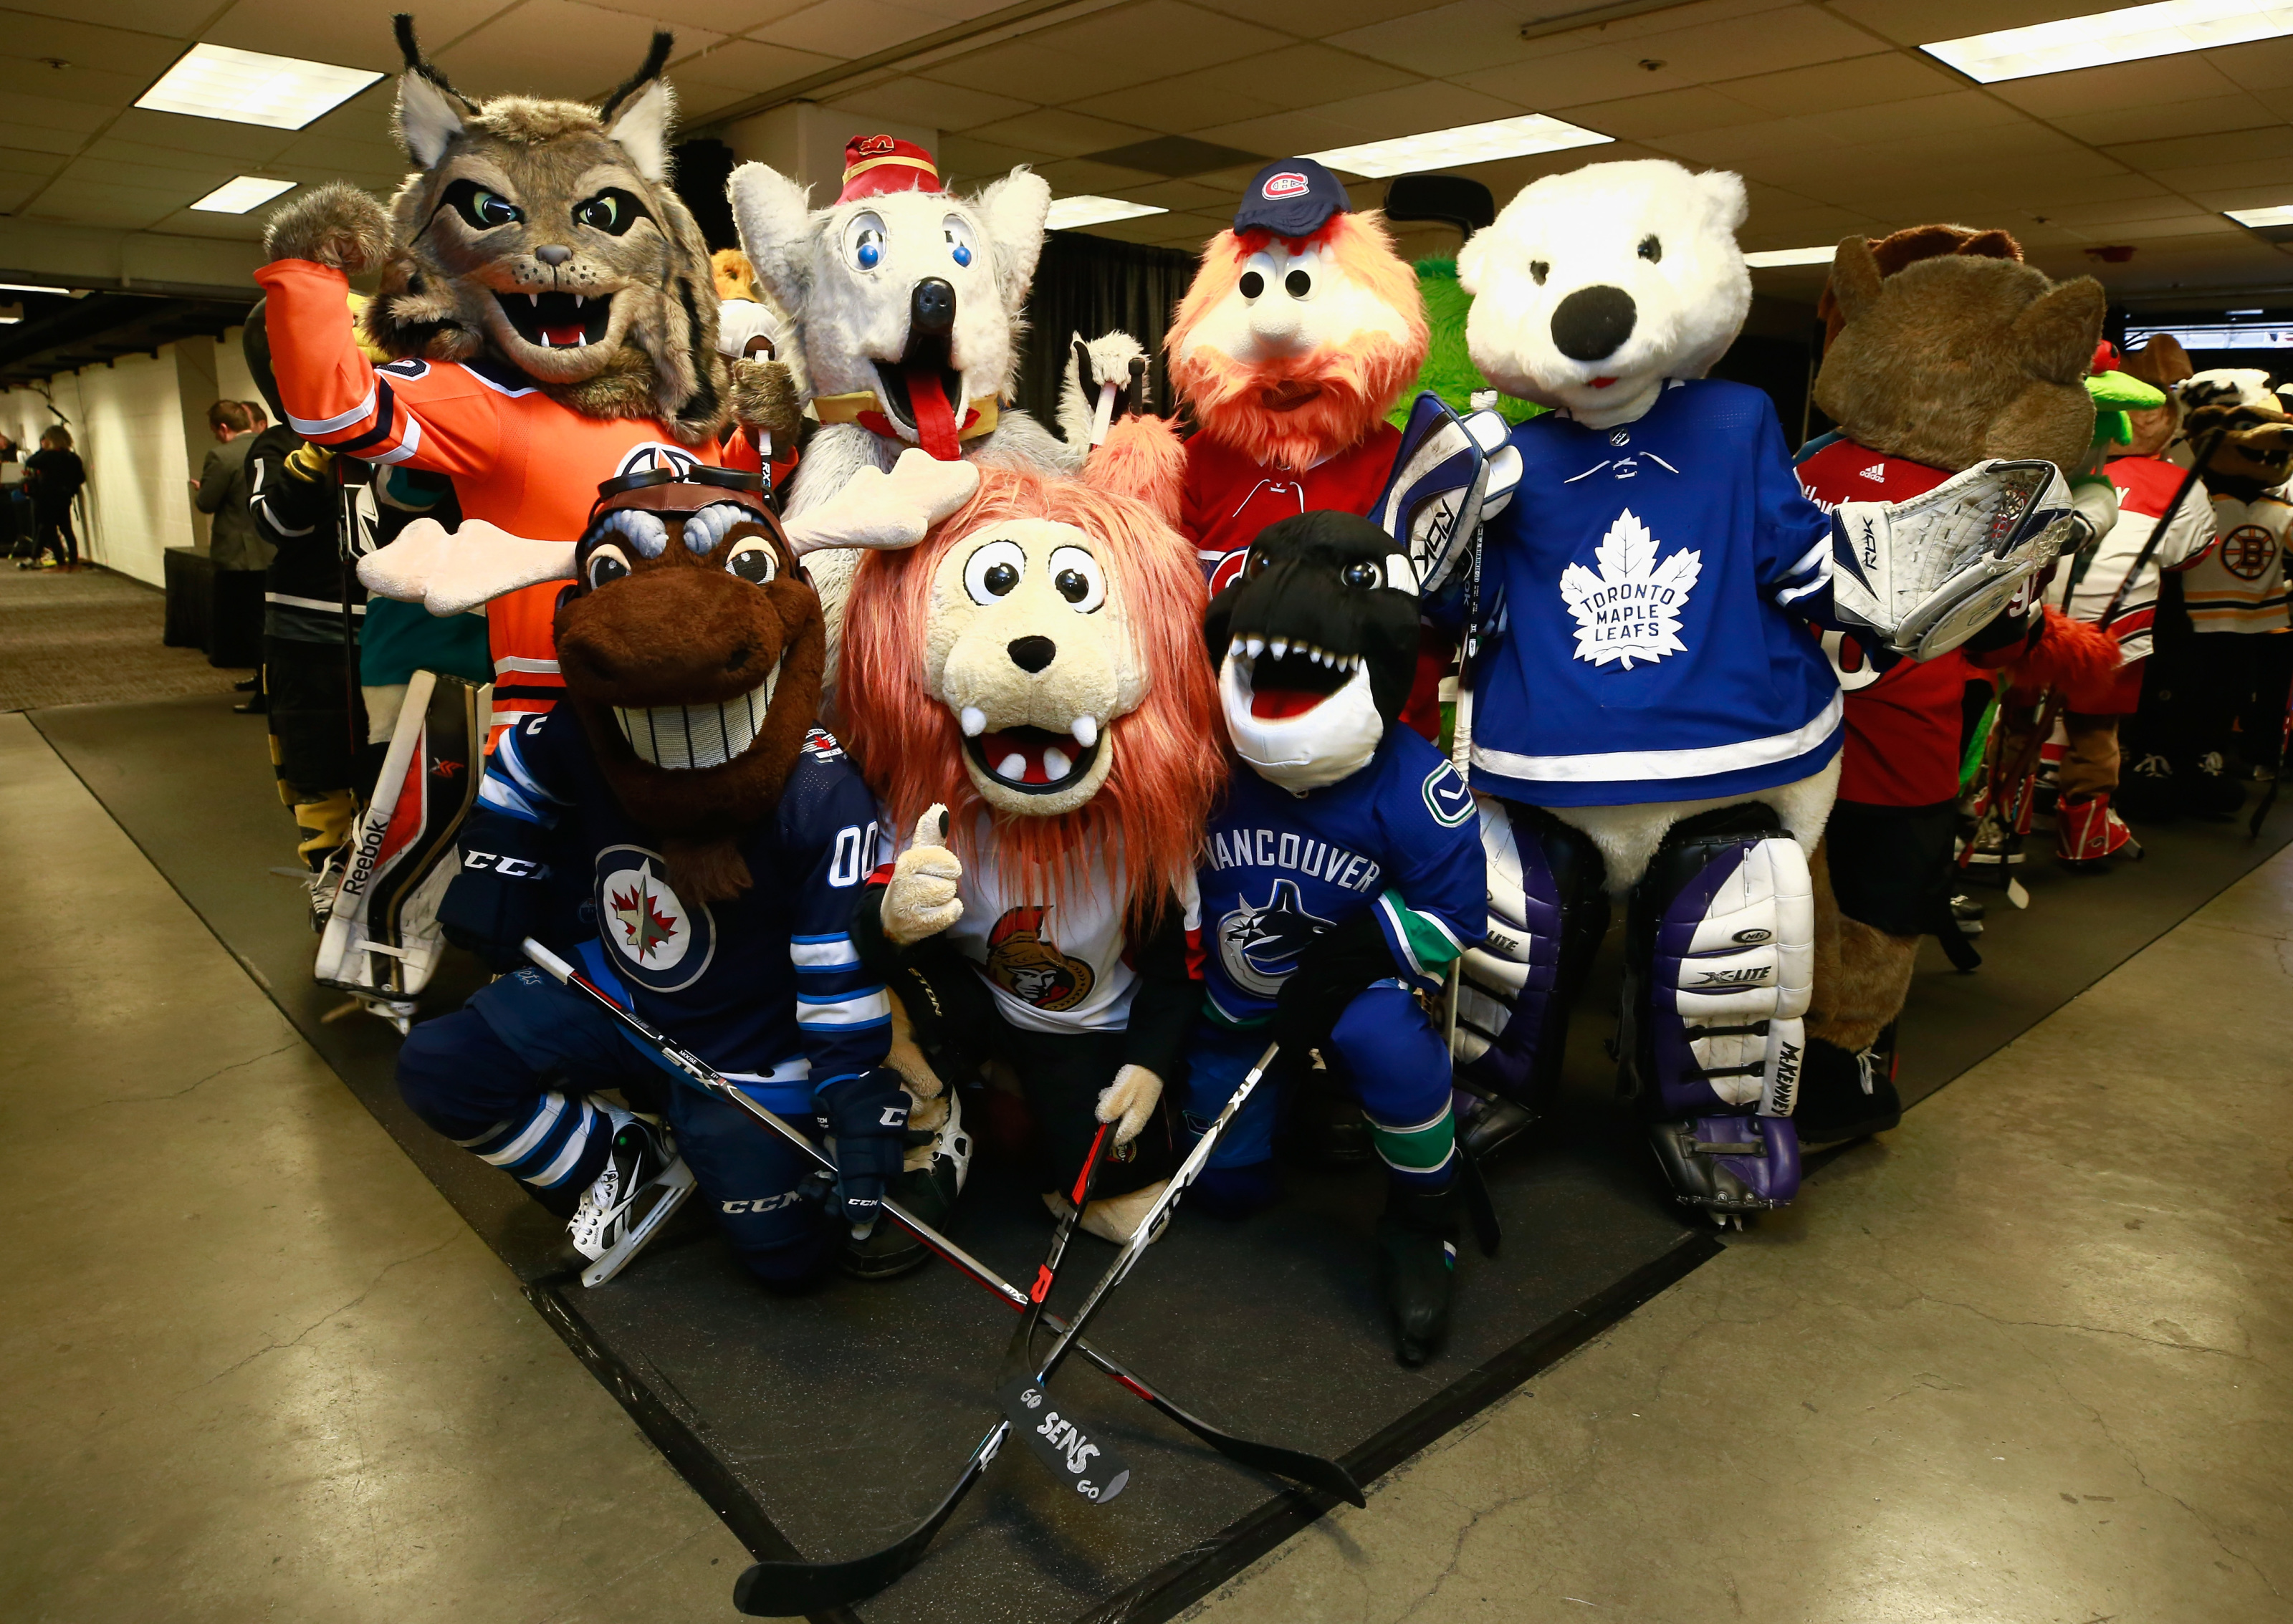 Kids hunt NHL mascots during All-Star Game